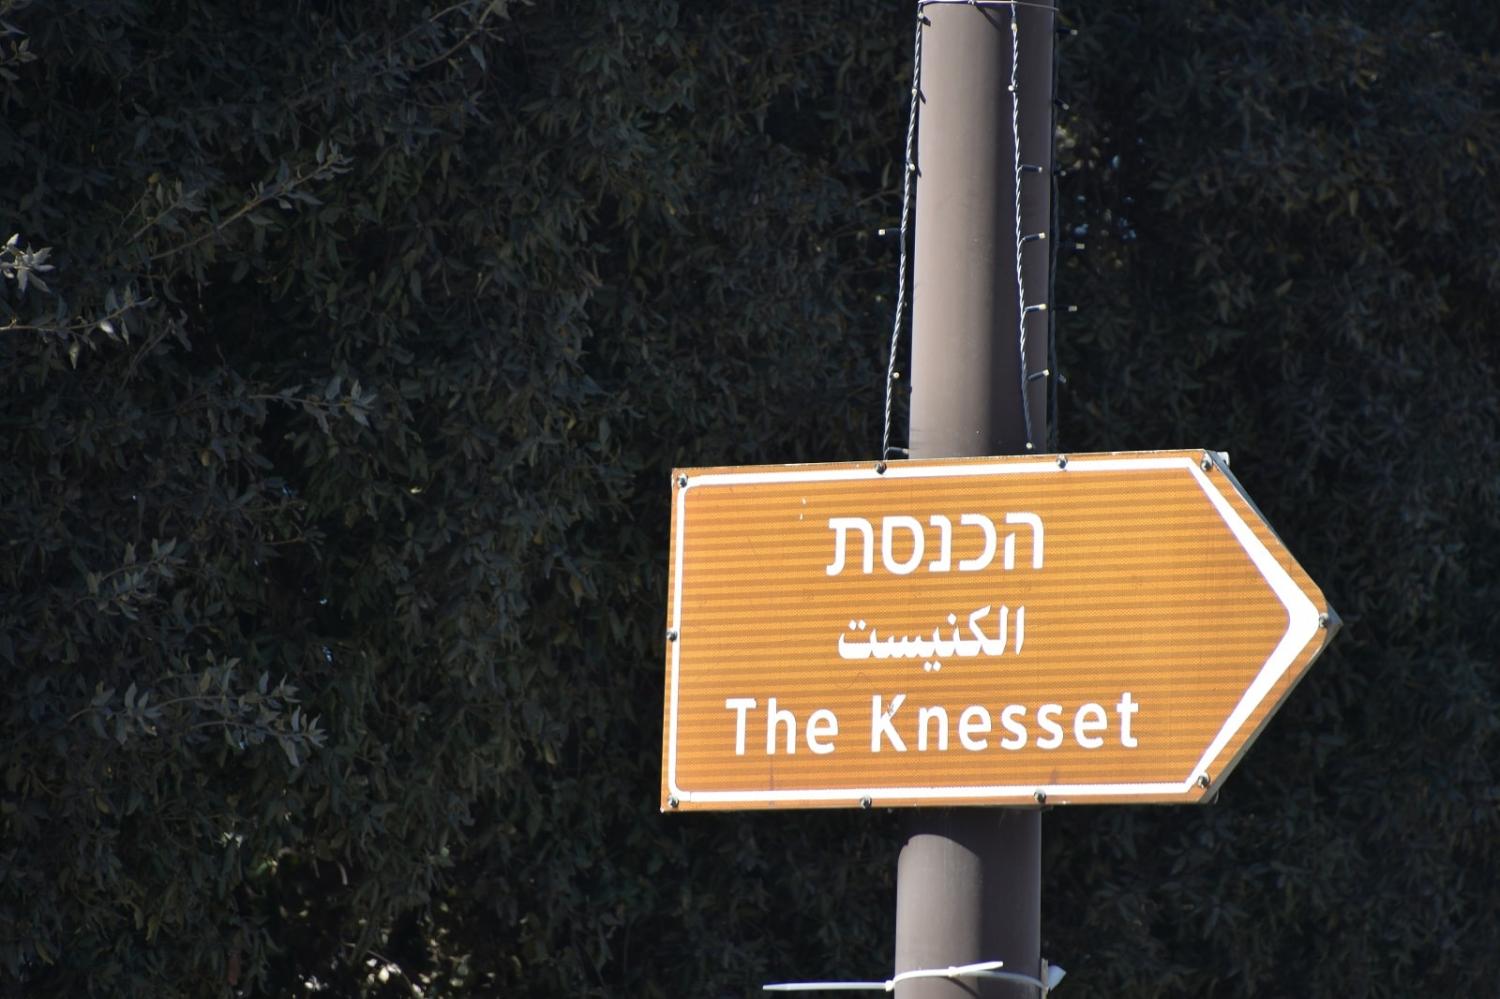 The Knesset, Israel's parliament, is located in West Jerusalem (tzahiV/Getty Images)